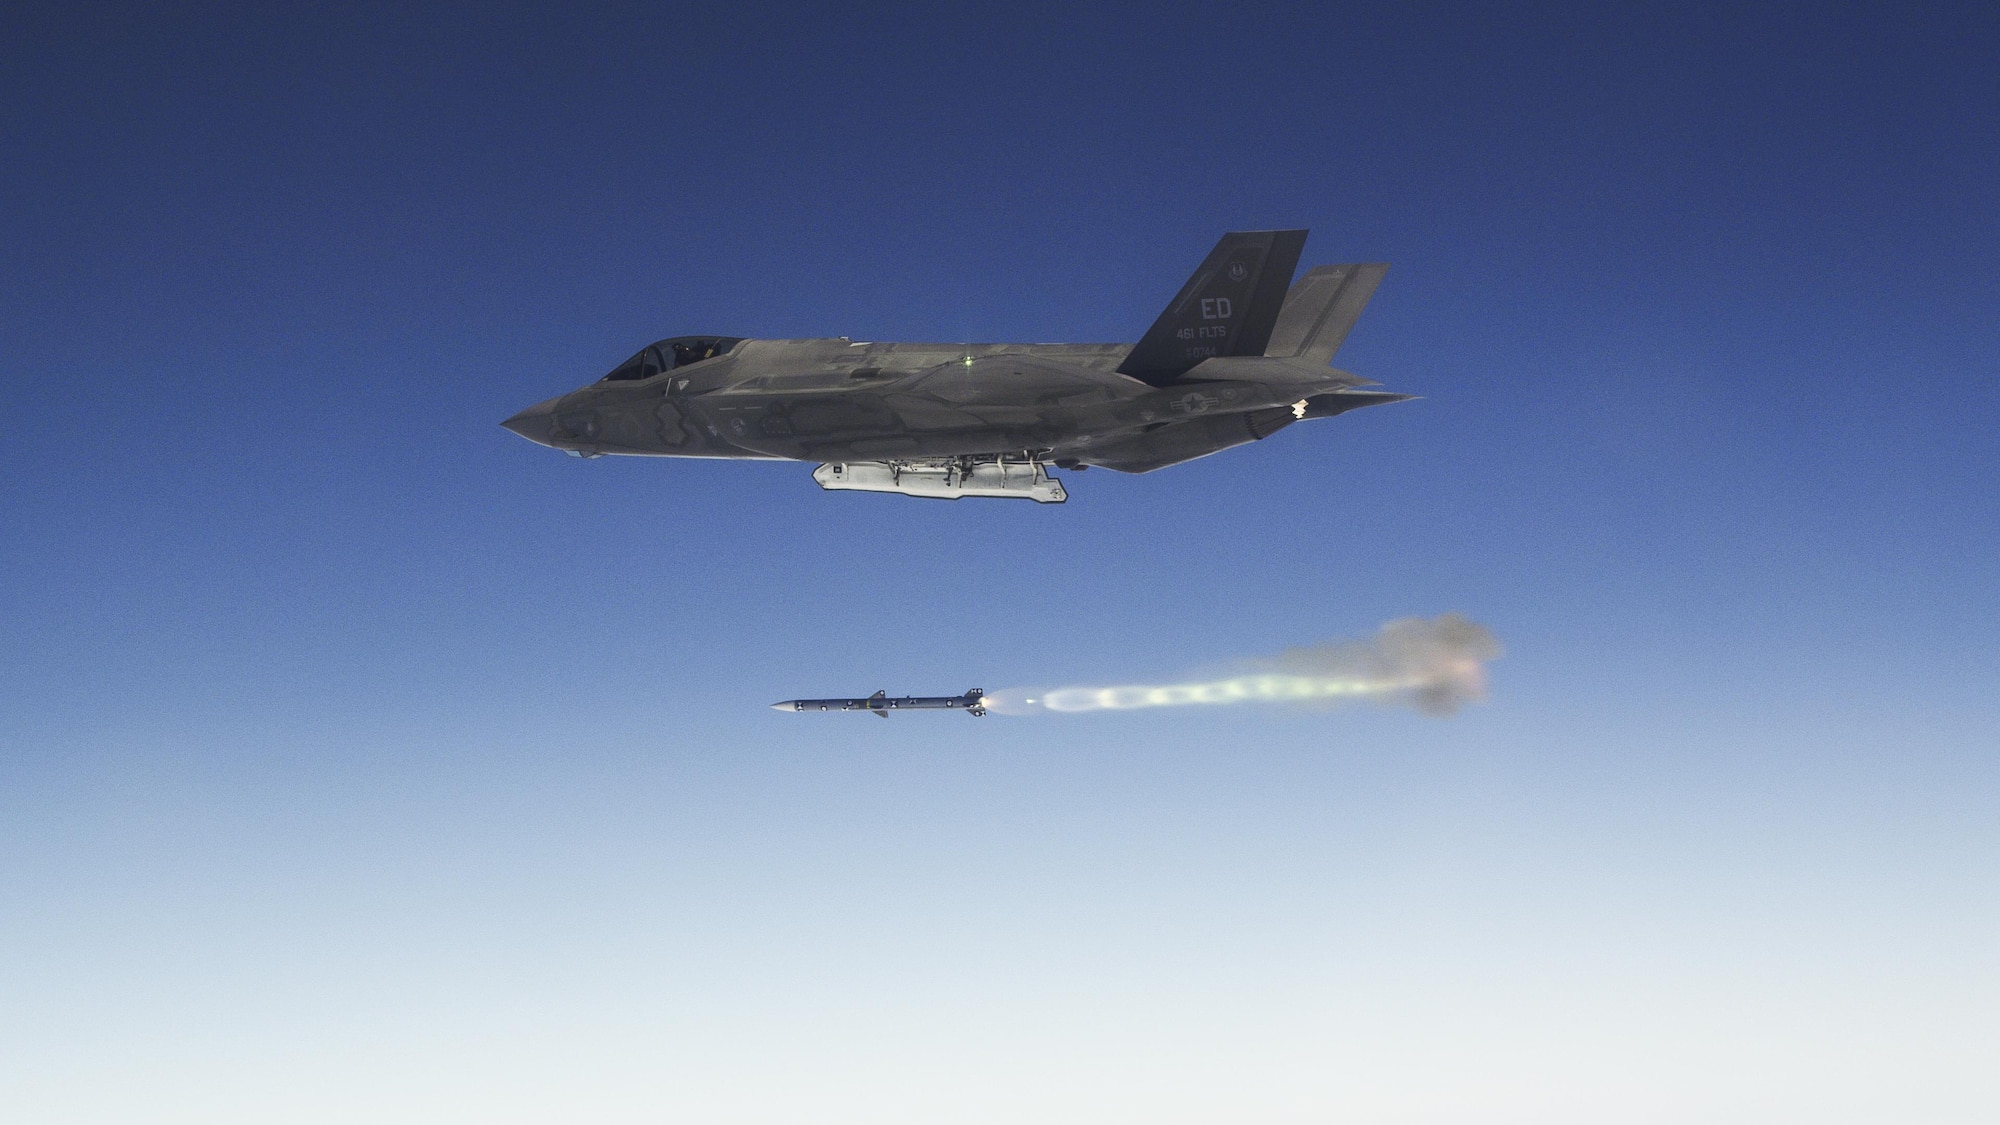 An F-35 fires an AIM-120 missile over the Pacific Ocean range near NAWS Point Mugu during a recent Weapons Delivery Accuracy testing surge. (Photo by Darrin Russel/Lockheed Martin)